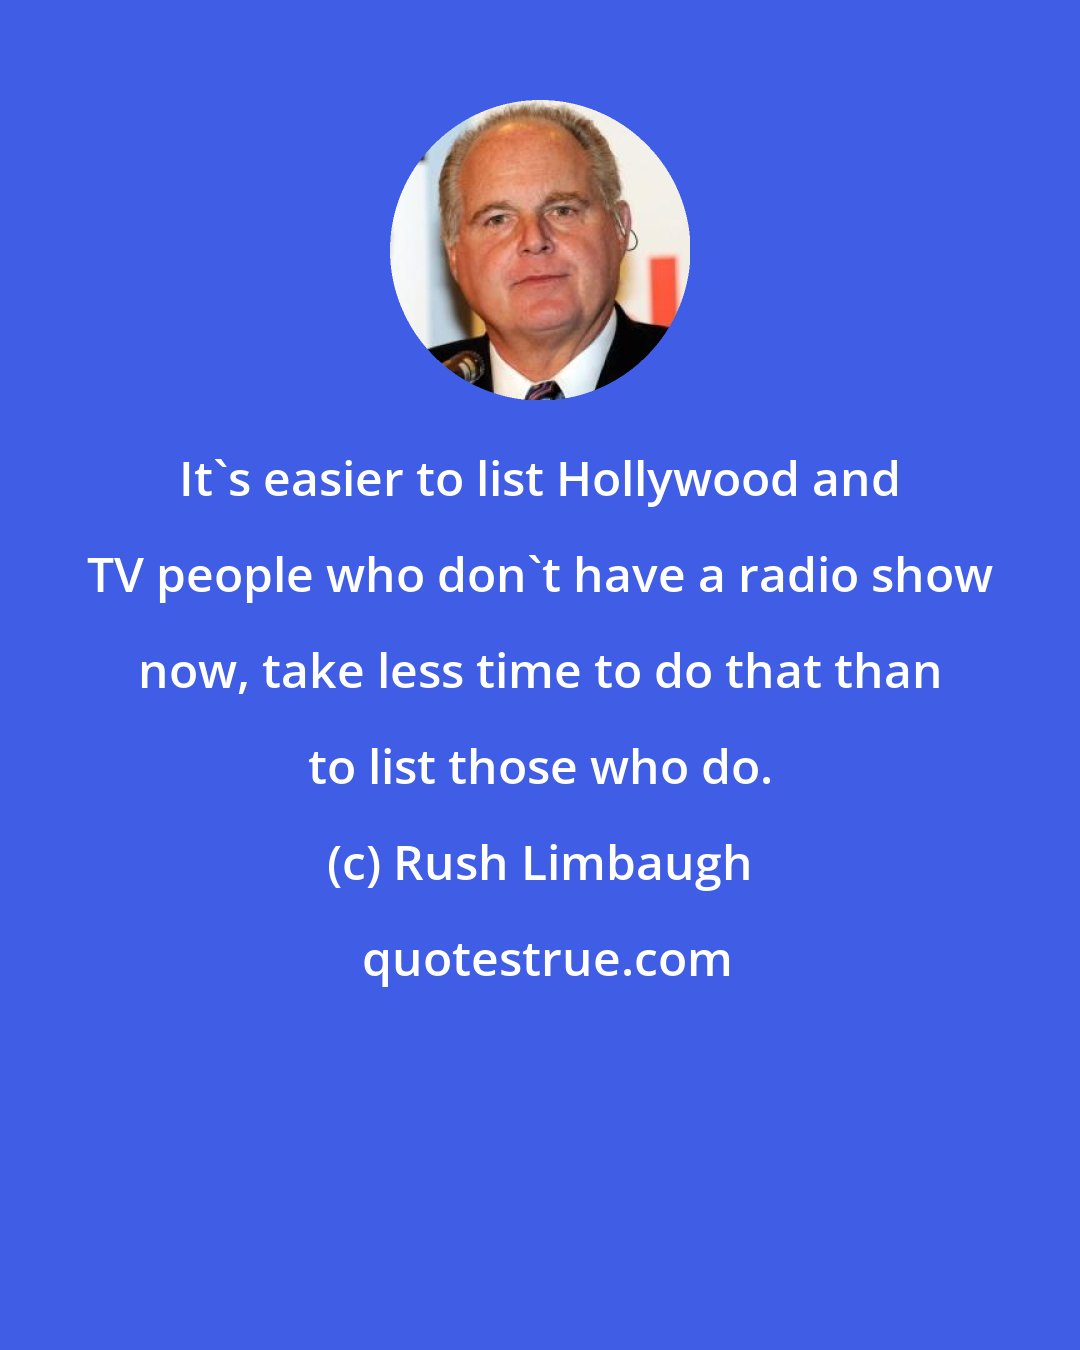 Rush Limbaugh: It's easier to list Hollywood and TV people who don't have a radio show now, take less time to do that than to list those who do.